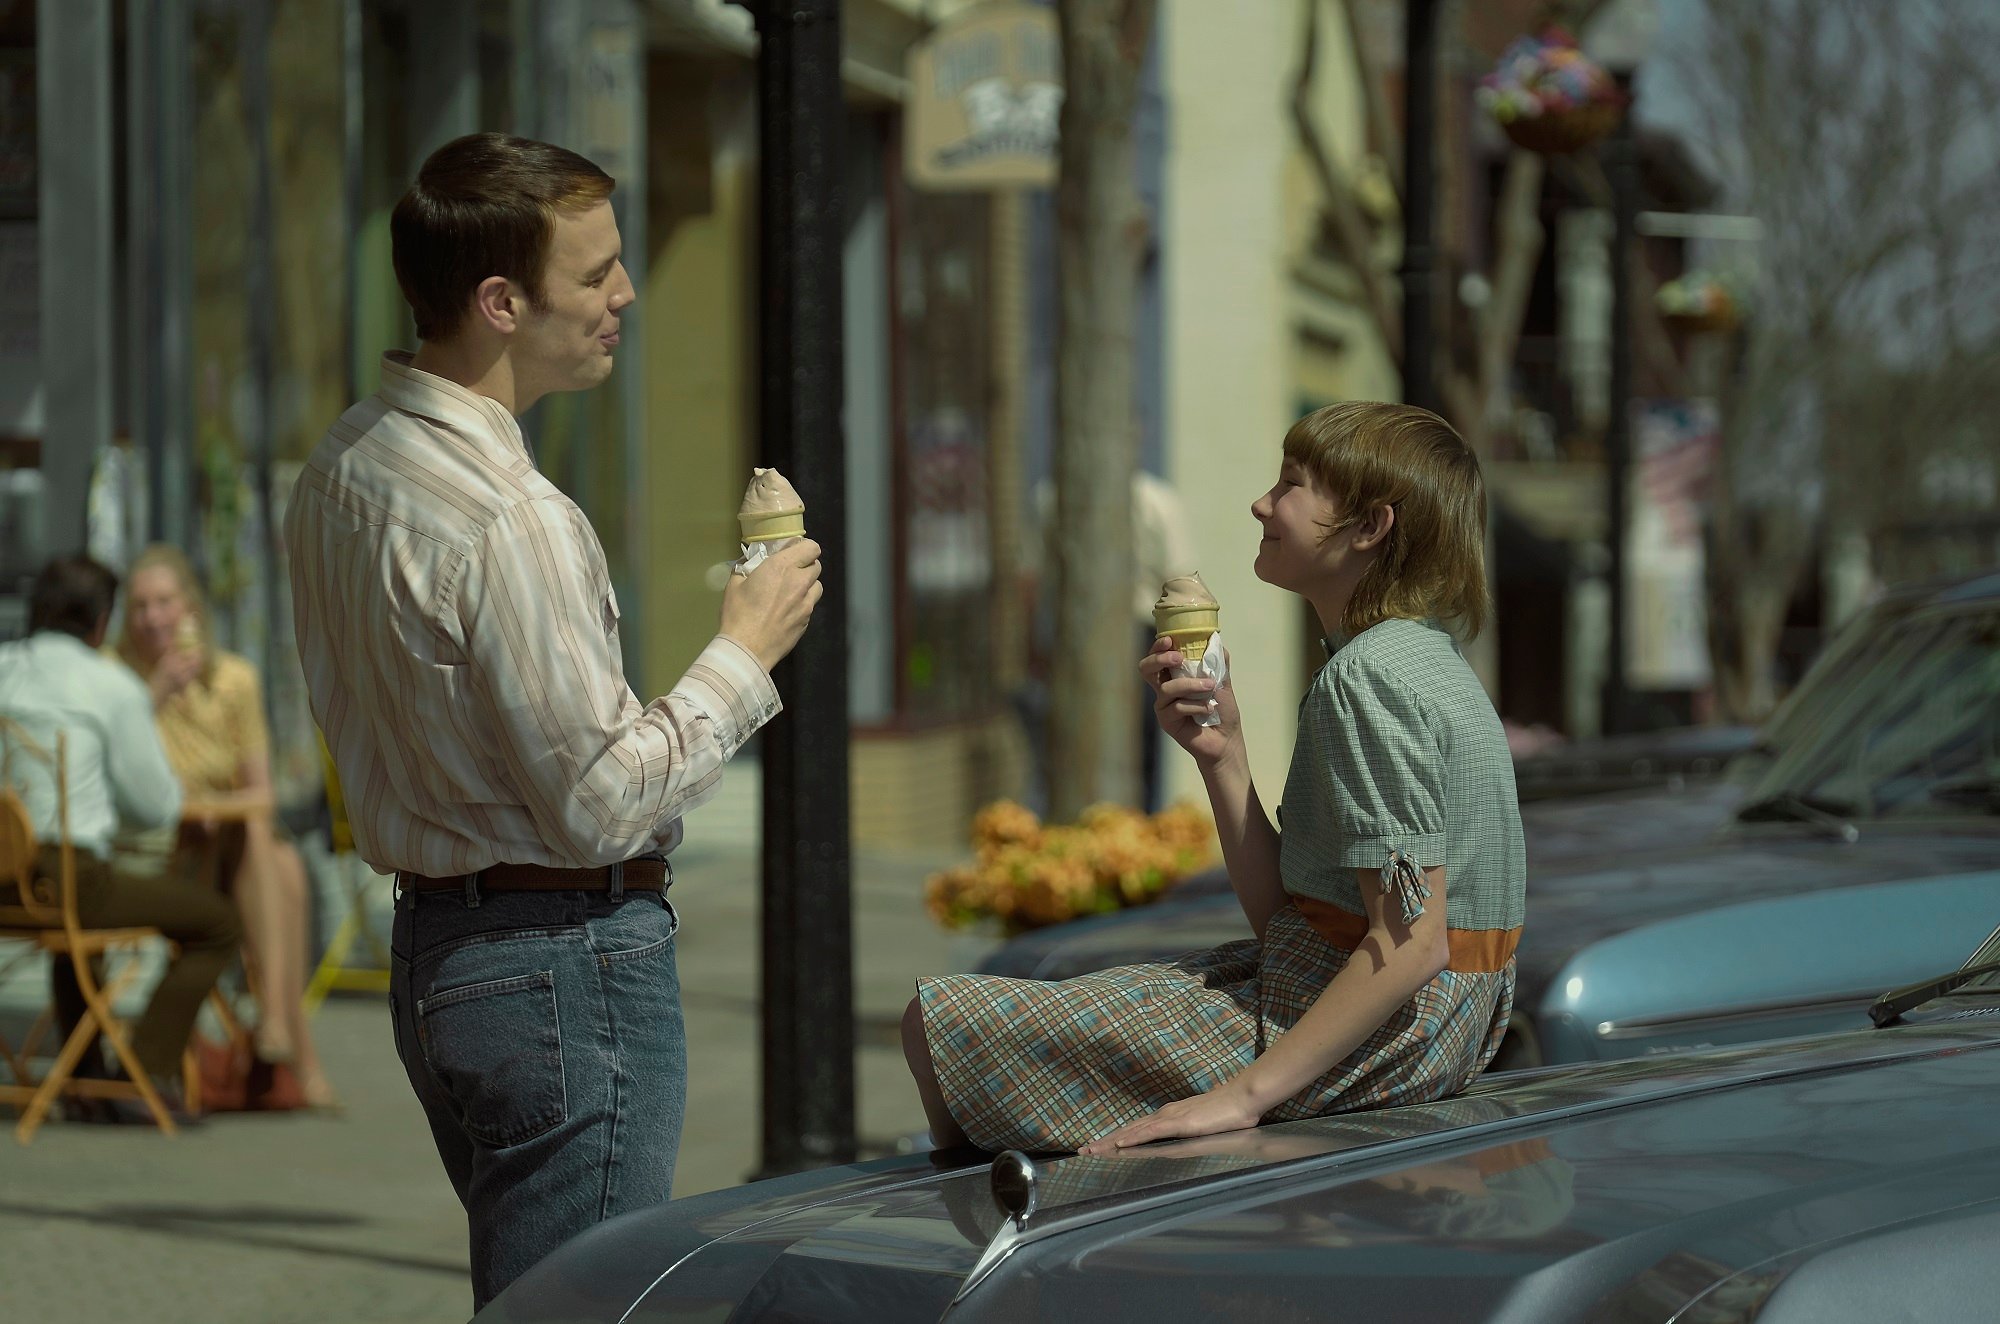 'A Friend of the Family' Jake Lacy as Robert Berchtold and Hendrix Yancey as young Jan Broberg eating ice cream together